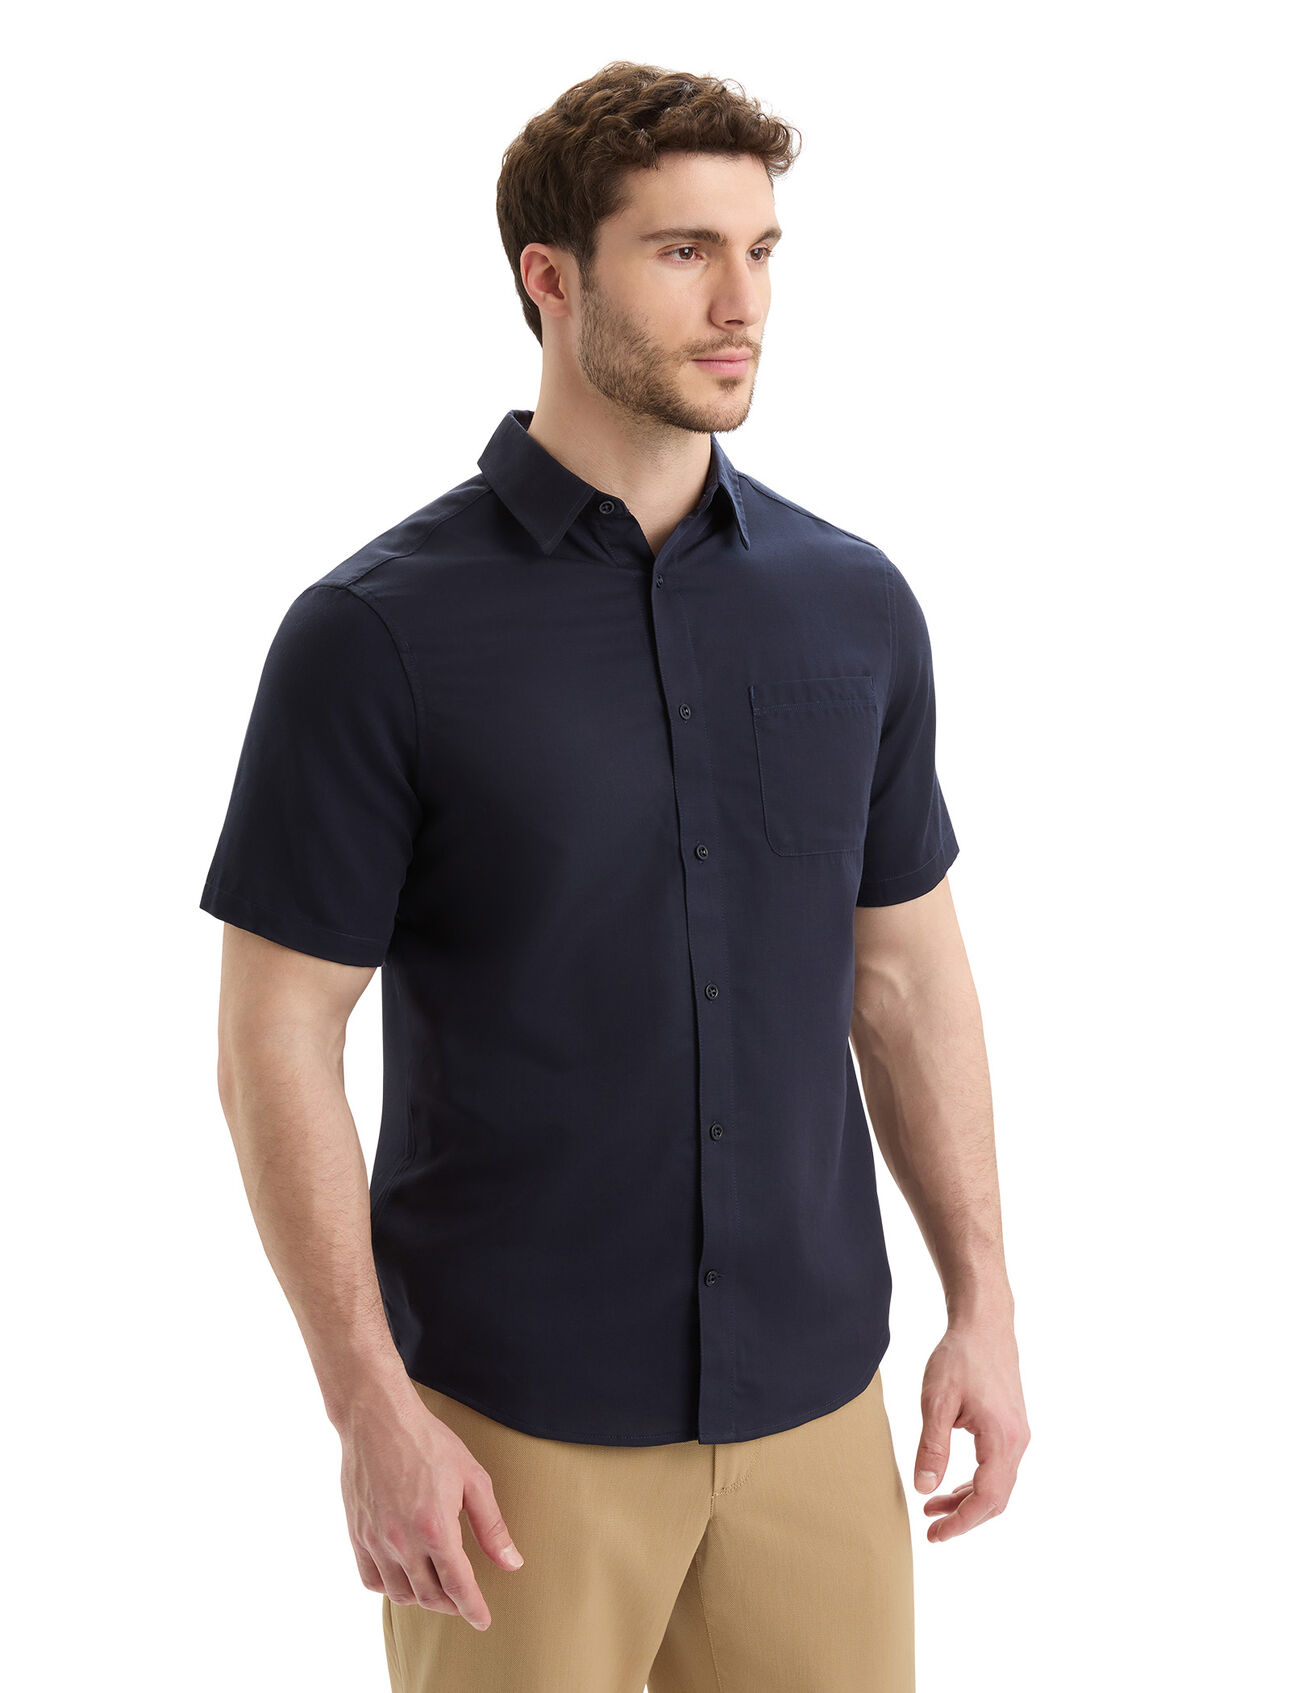 Mens Merino Steveston Short Sleeve Shirt A classic lightweight woven shirt featuring our breathable Cool-Lite™ woven merino blend, the Steveston Short Sleeve Shirt combines versatile style with natural comfort.